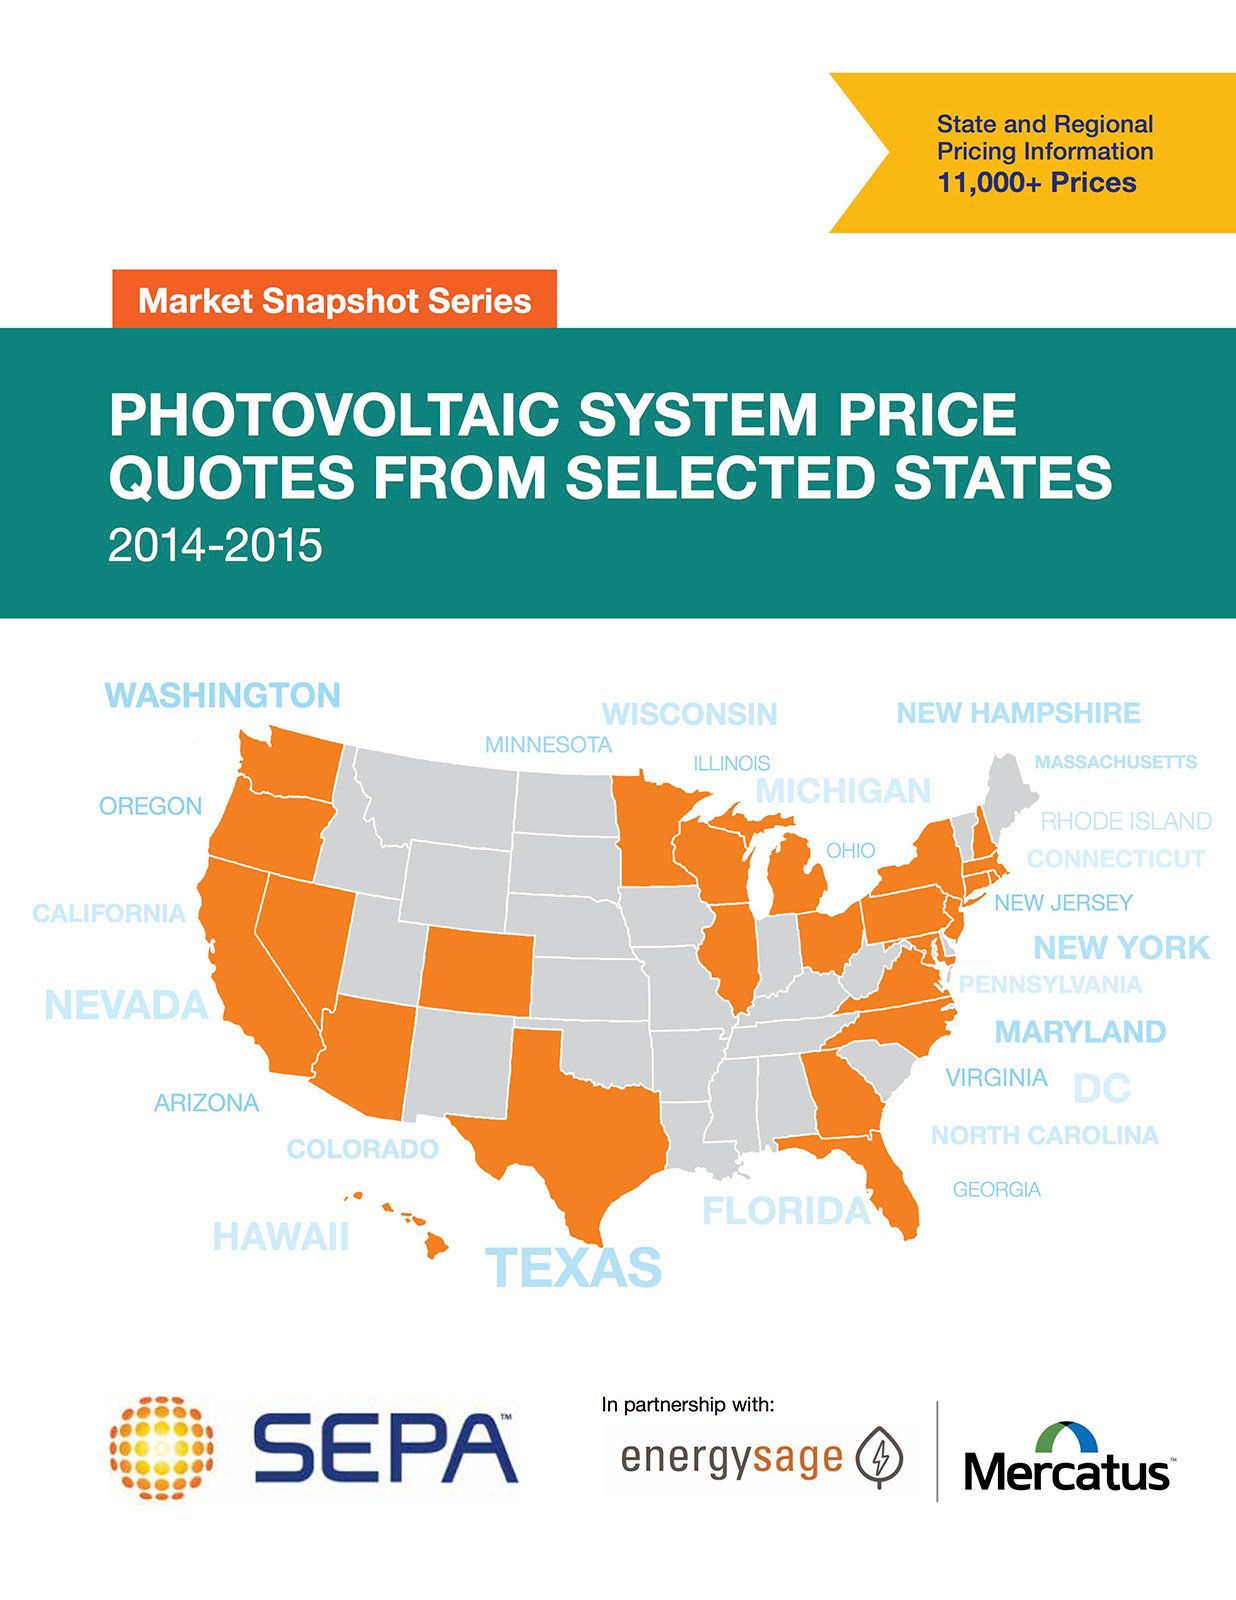 Photovoltaic System Price Quotes from Selected States (2014-2015)